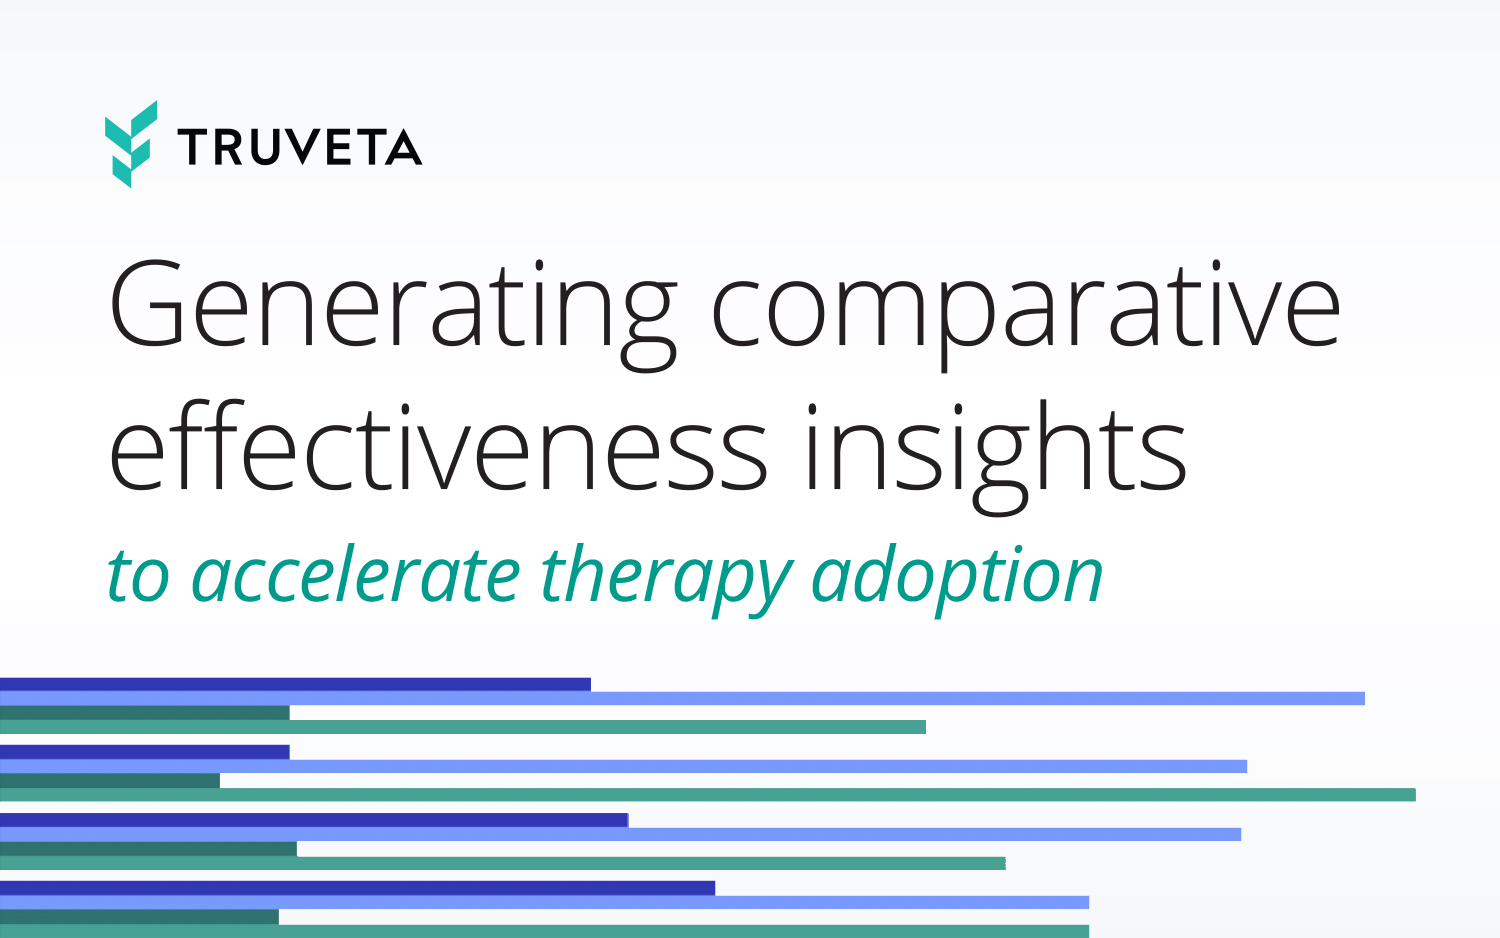 Generating comparative effectiveness insights to accelerate therapy adoption. Learn how patient-level EHR data available through Truveta Data empowers life sciences companies with comprehensive insights for evidence-based decision-making, personalized medicine, and equitable healthcare access.